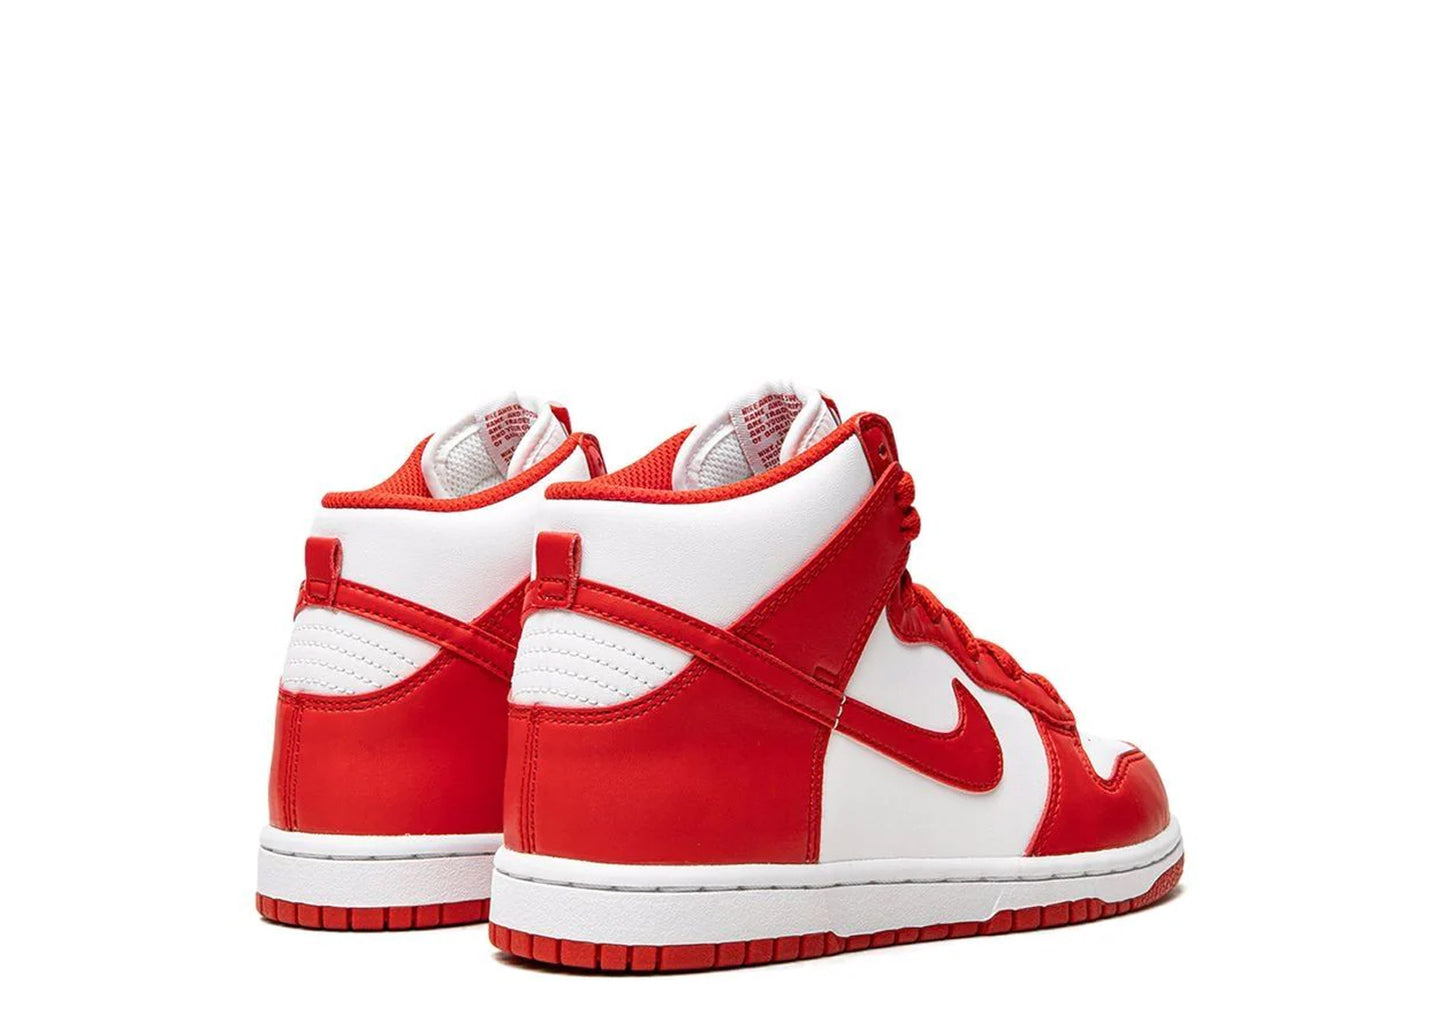 Nike Dunk High PS "Championship Red"